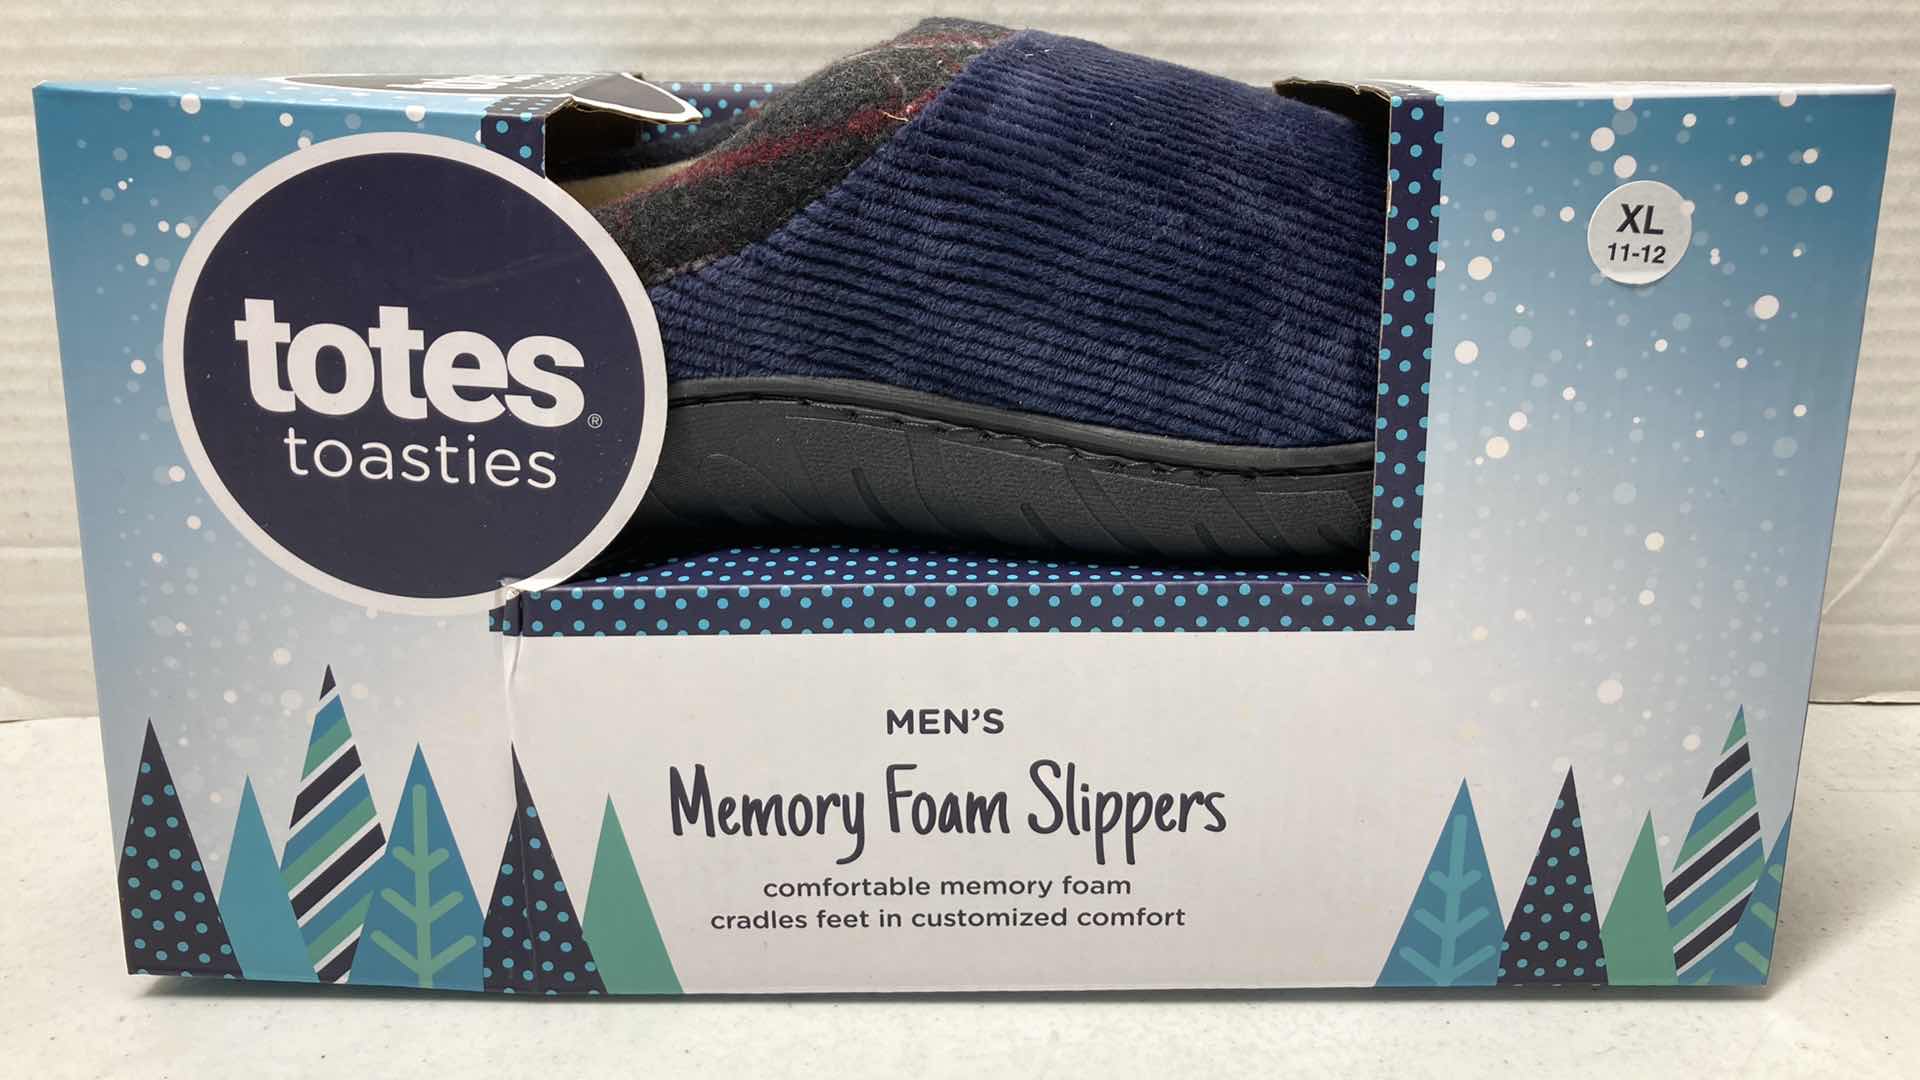 Photo 4 of NEW TOTES TOASTIES MEMORY FOAM SLIPPERS MENS SIZE XL 11-12 (2)